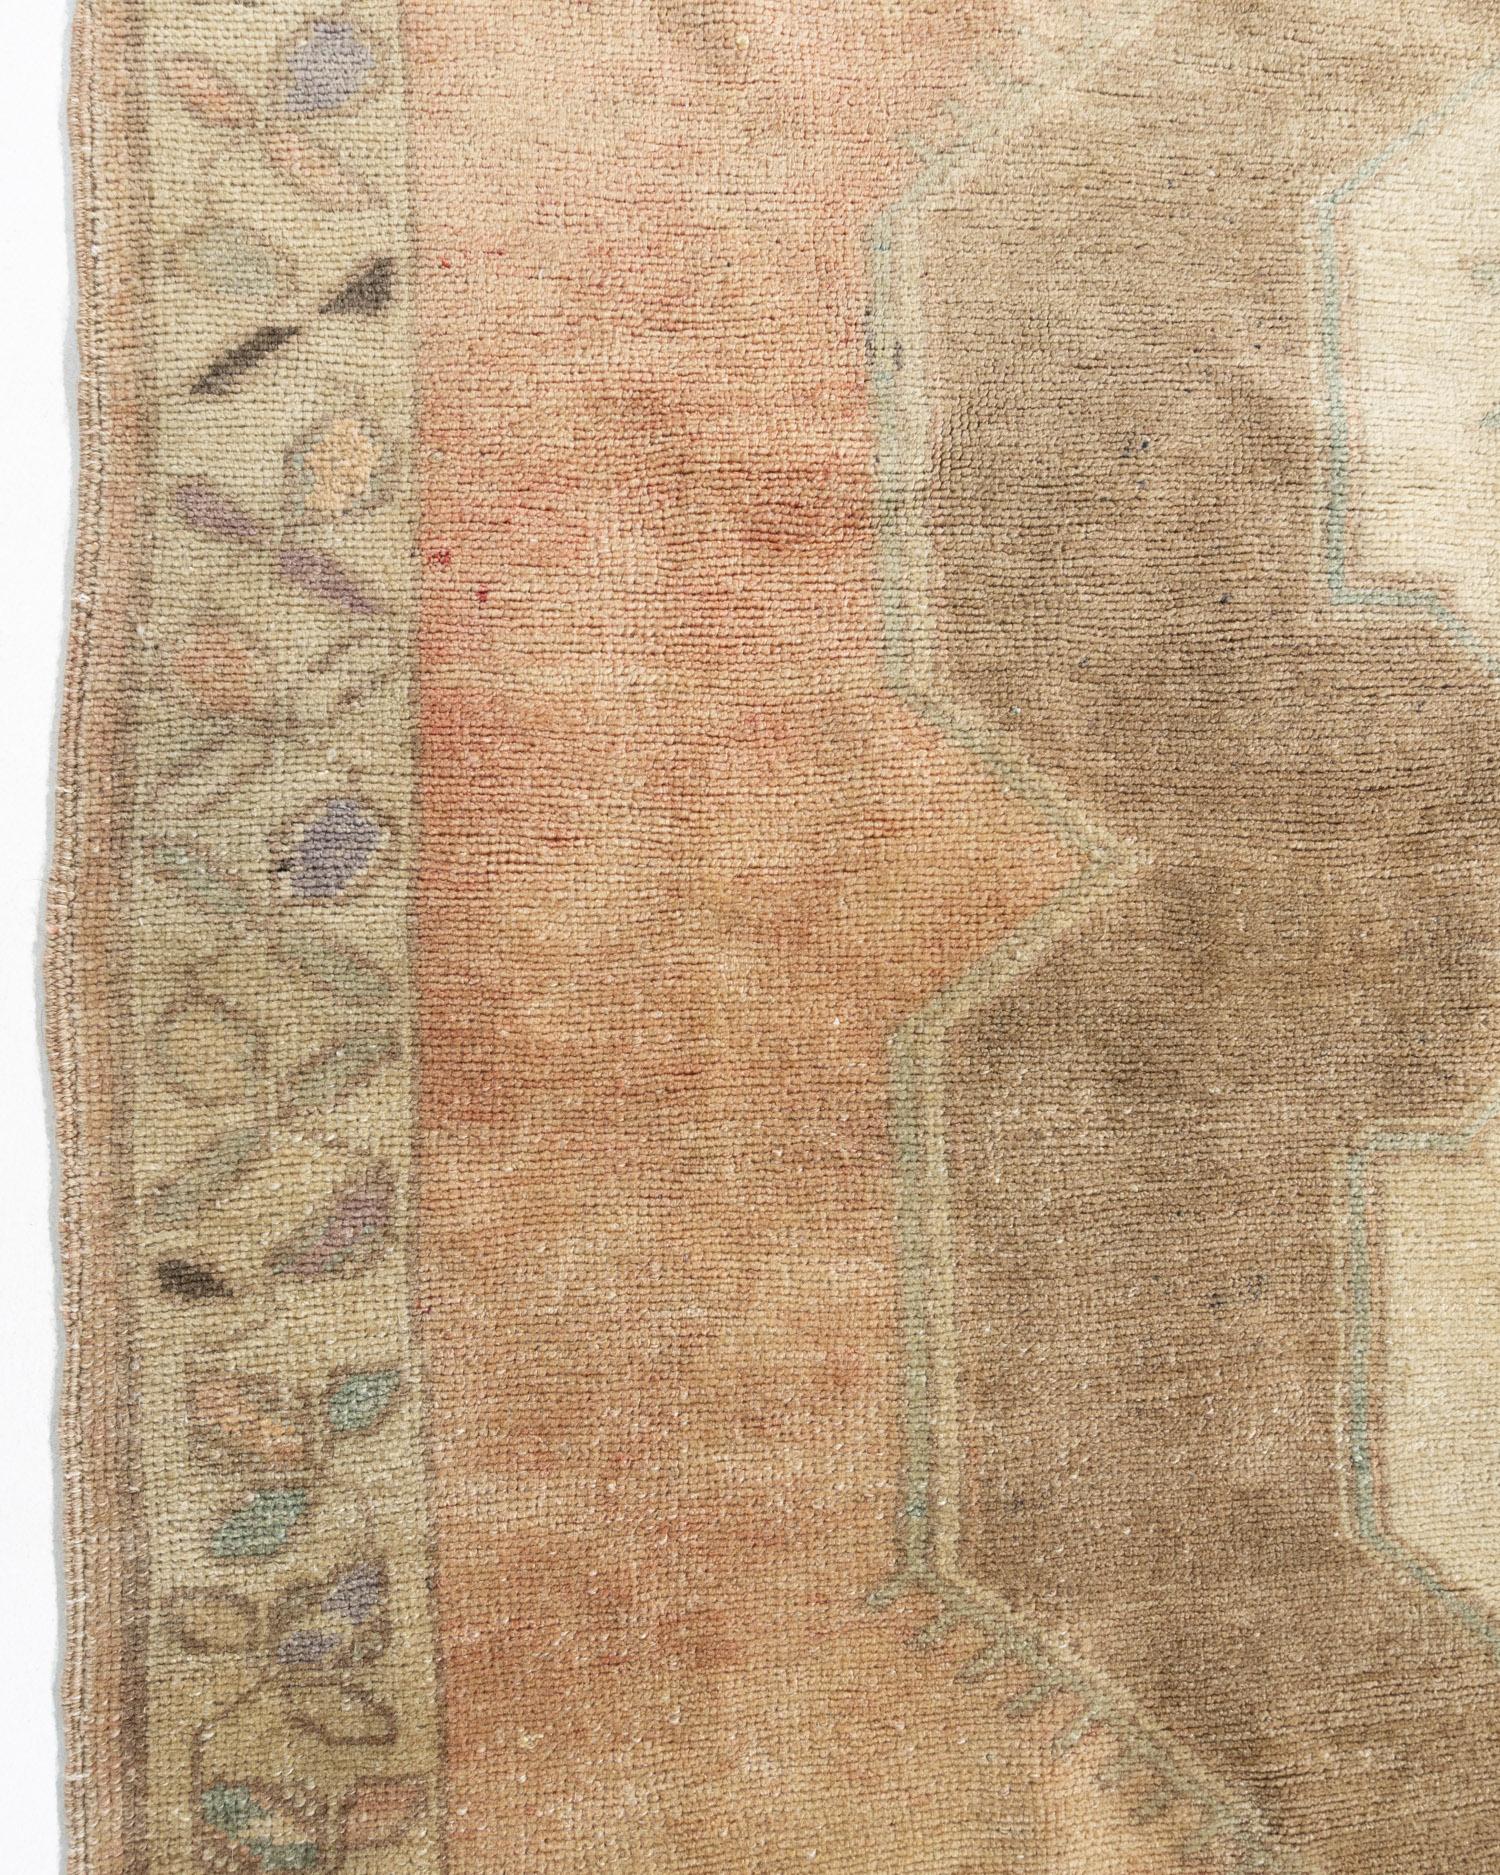 Vintage Tan Turkish Oushak Area Rug, 5'1 X 9'5. Oushak's are known for their soft palettes combined with eccentric drawing. Oushak in western Turkey has the longest continuous rug weaving history, stretching back at least to the mid-fifteenth